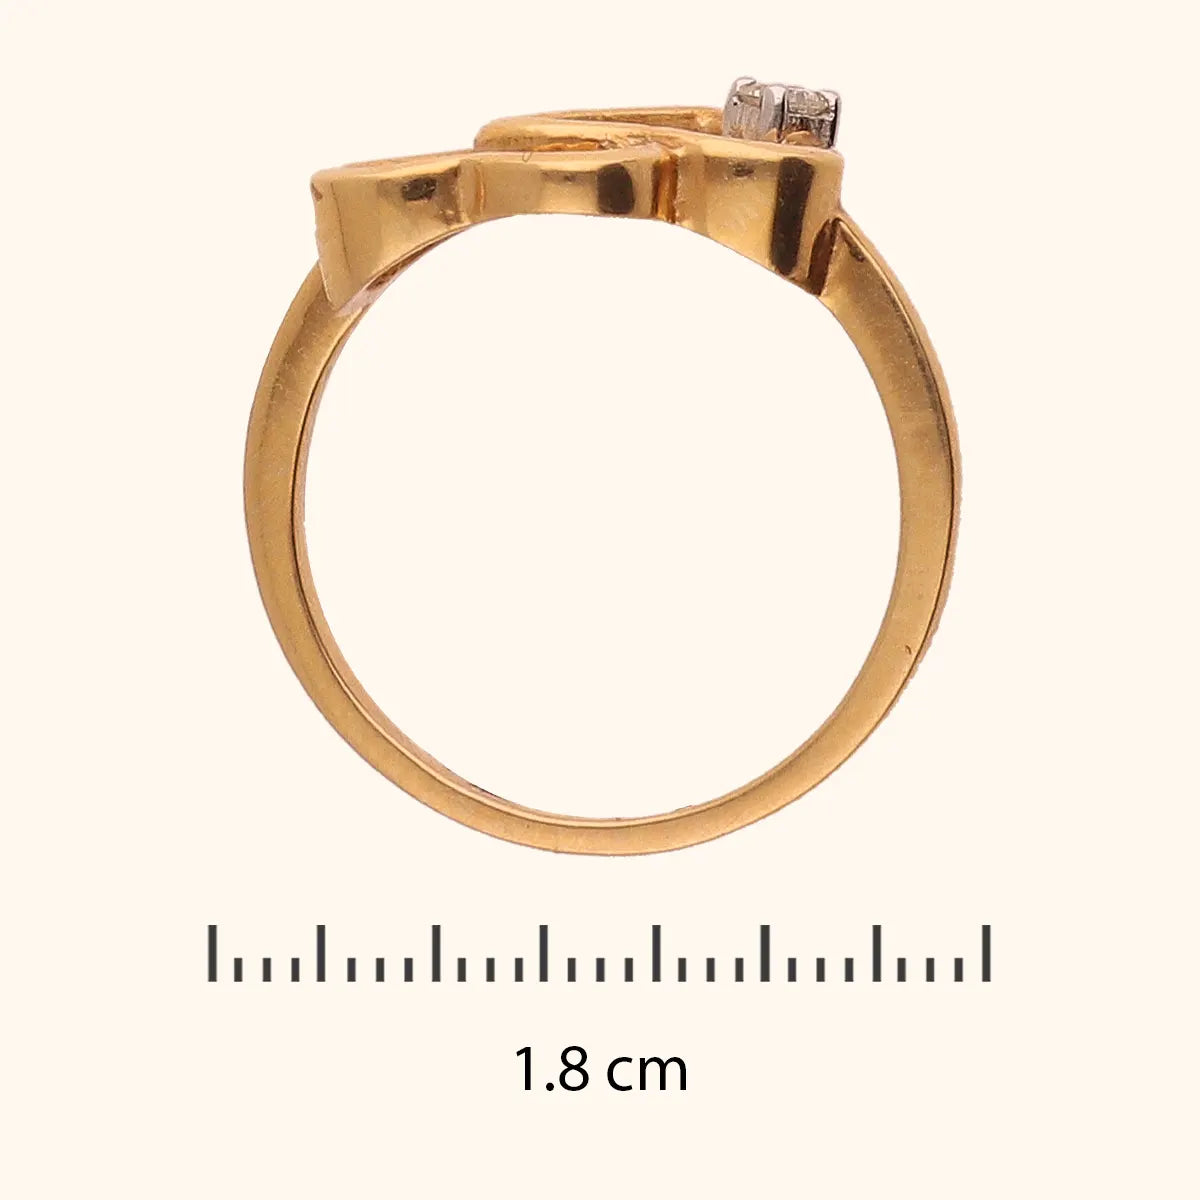 Buy quality 916 GOLD MENS CLASSIC BAND TYPE GENTS RING in Ahmedabad